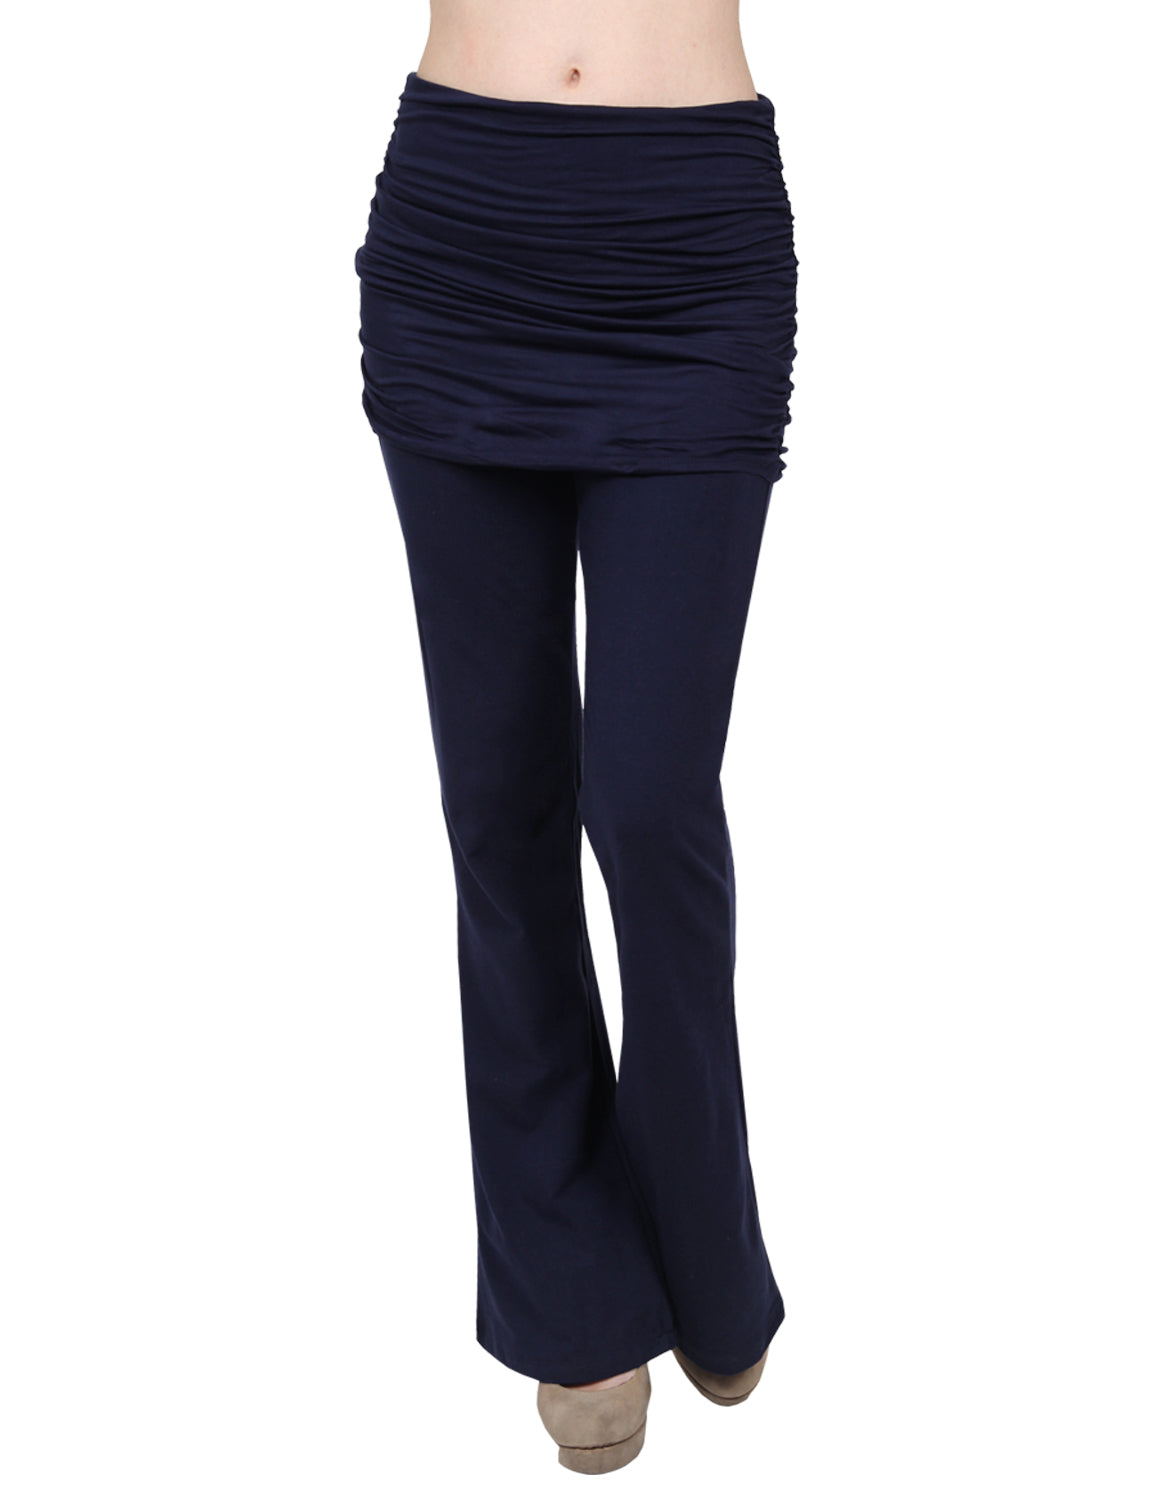 LIGHT WEIGHT SOLID STRETCH FOLD OVER FLARE YOGA PANTS - NE PEOPLE